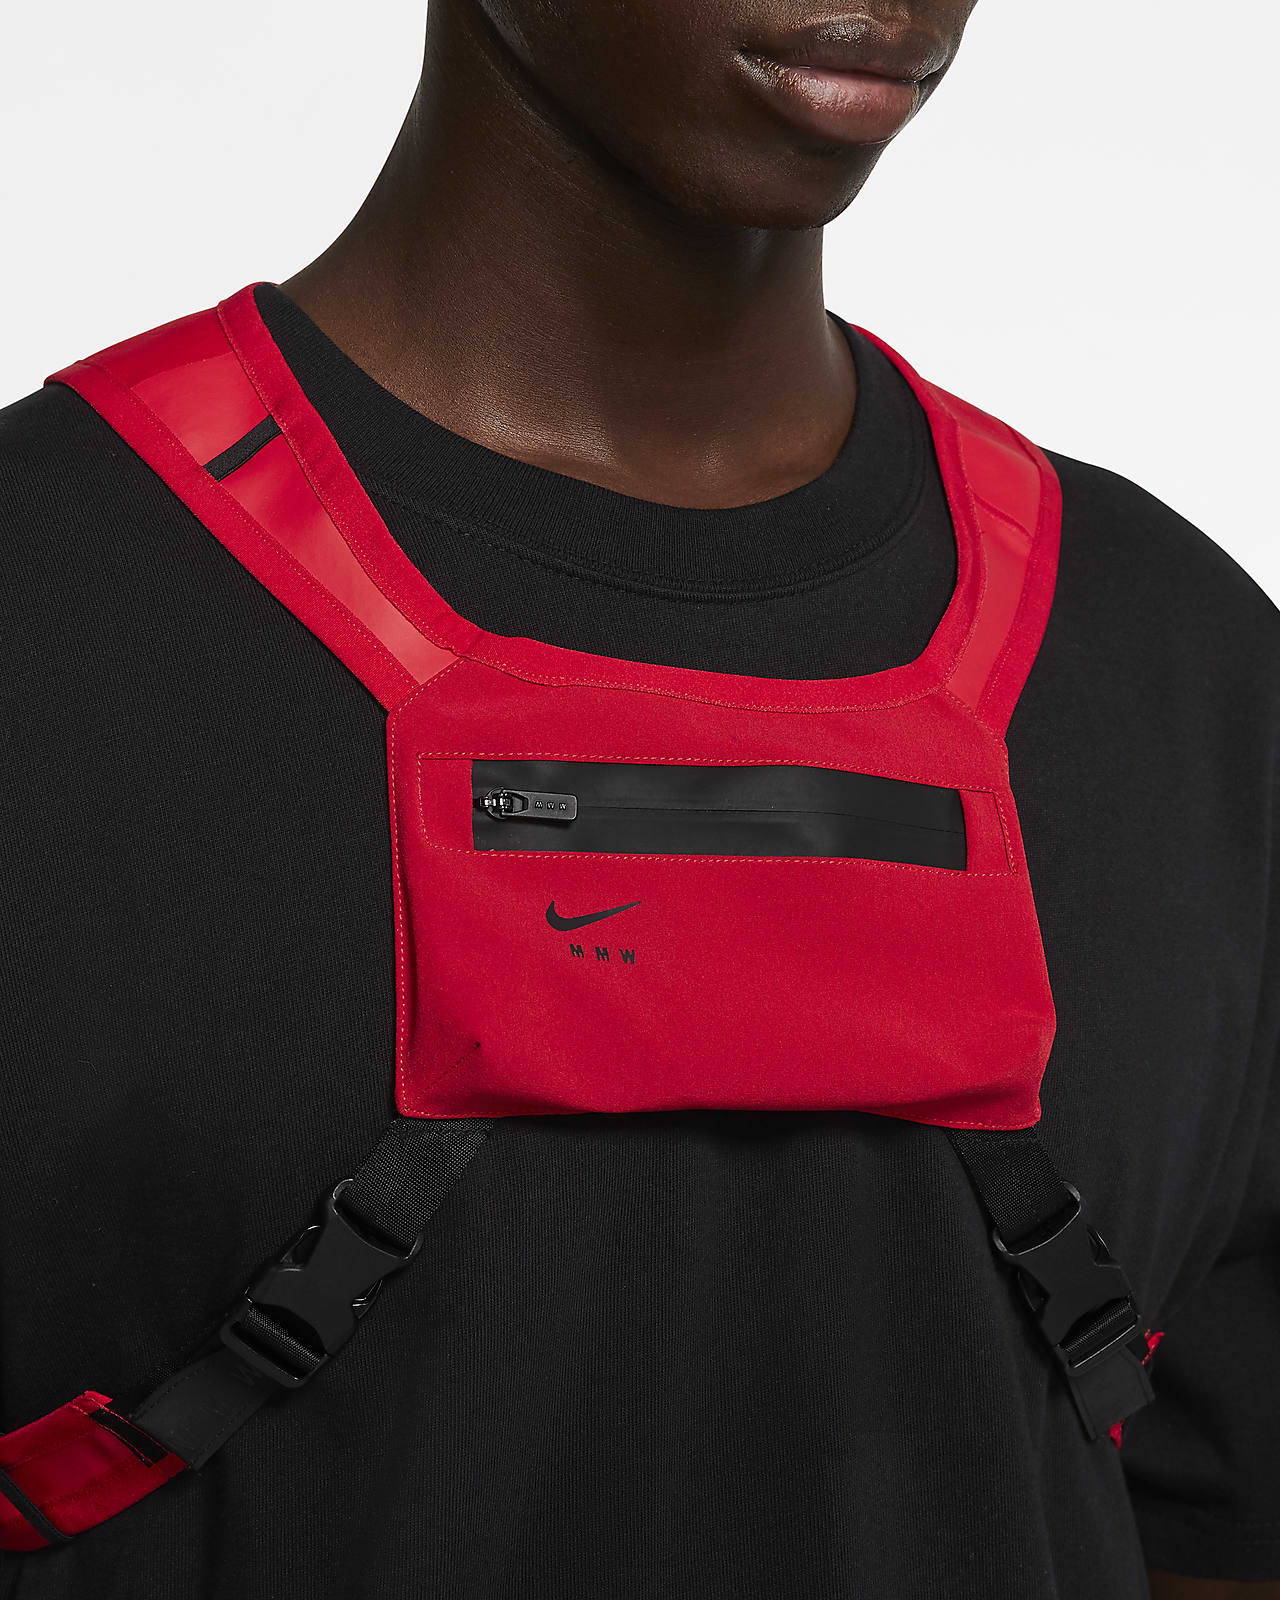 nike vest with pouch